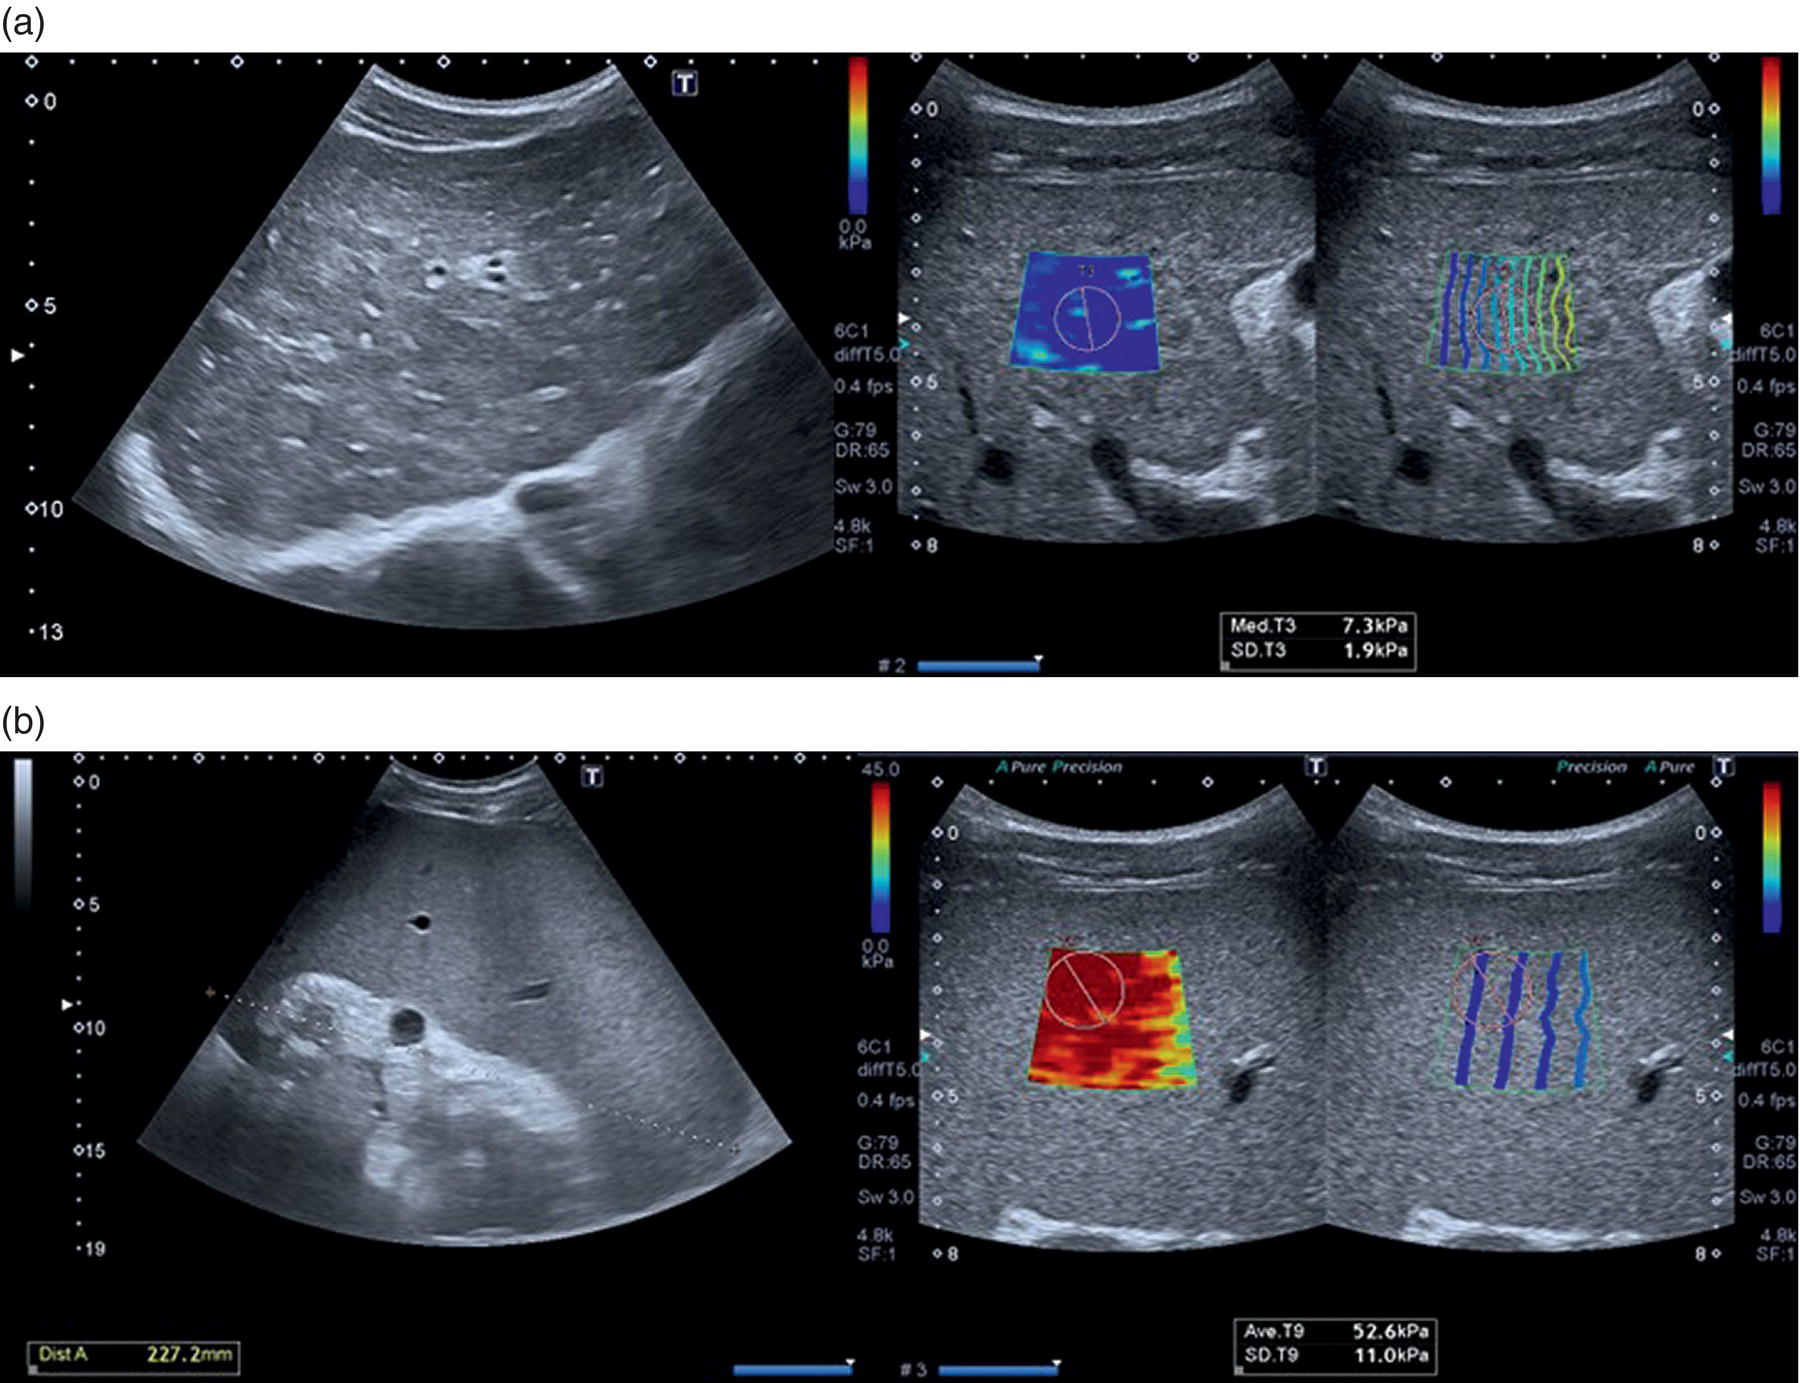 Two sets of scan images (a) heterogeneous liver echotexture with irregular outline and (b) homogeneous splenomegaly.